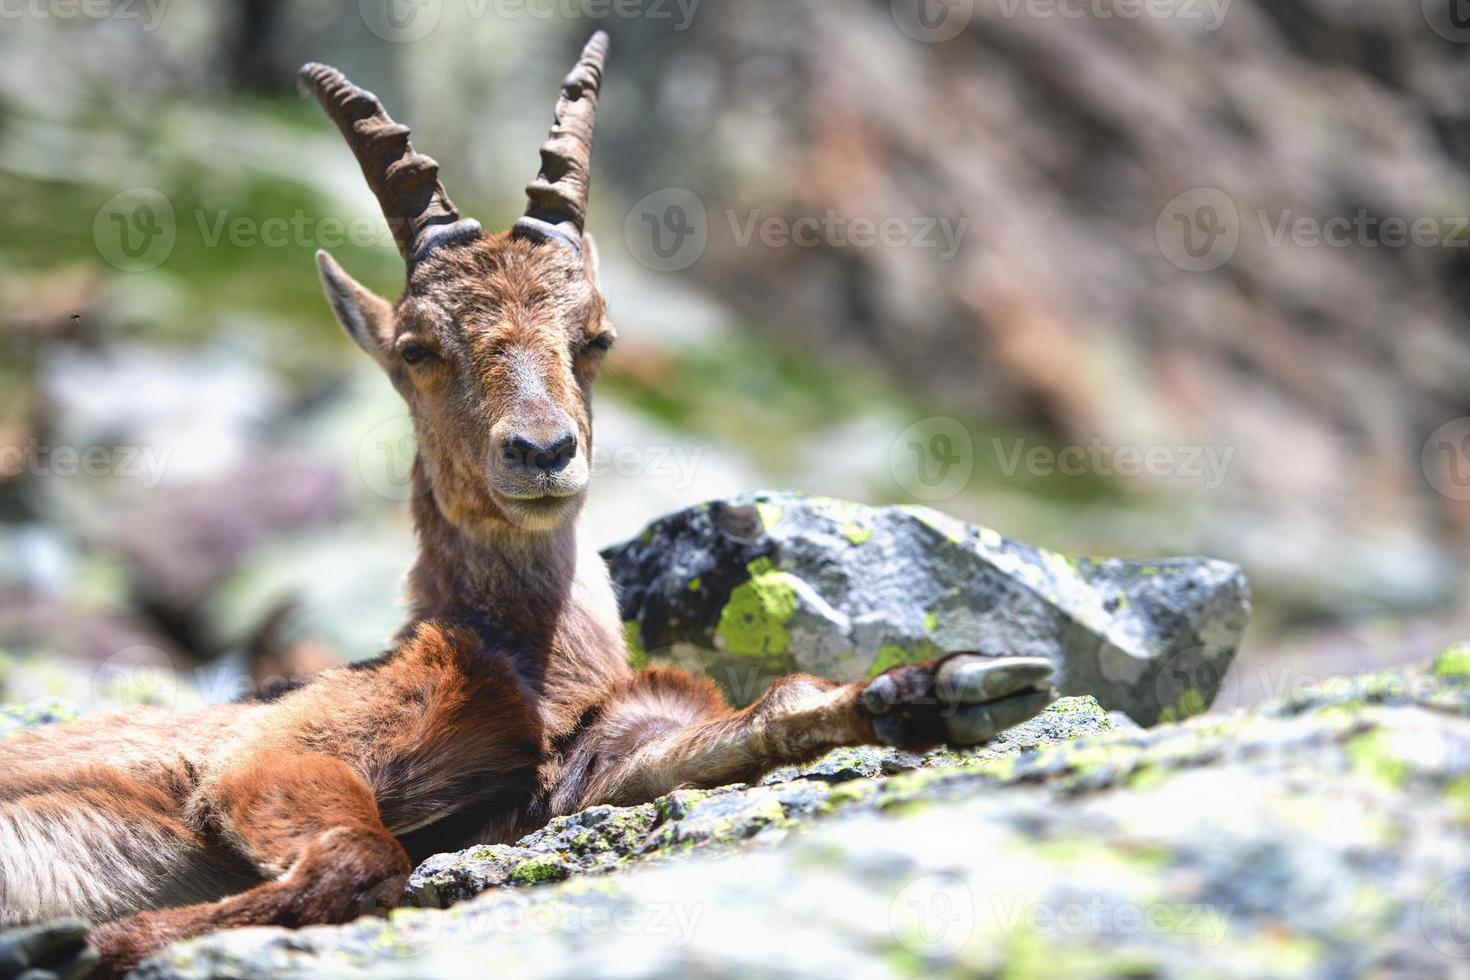 Female ibex resting crouched on stones photo